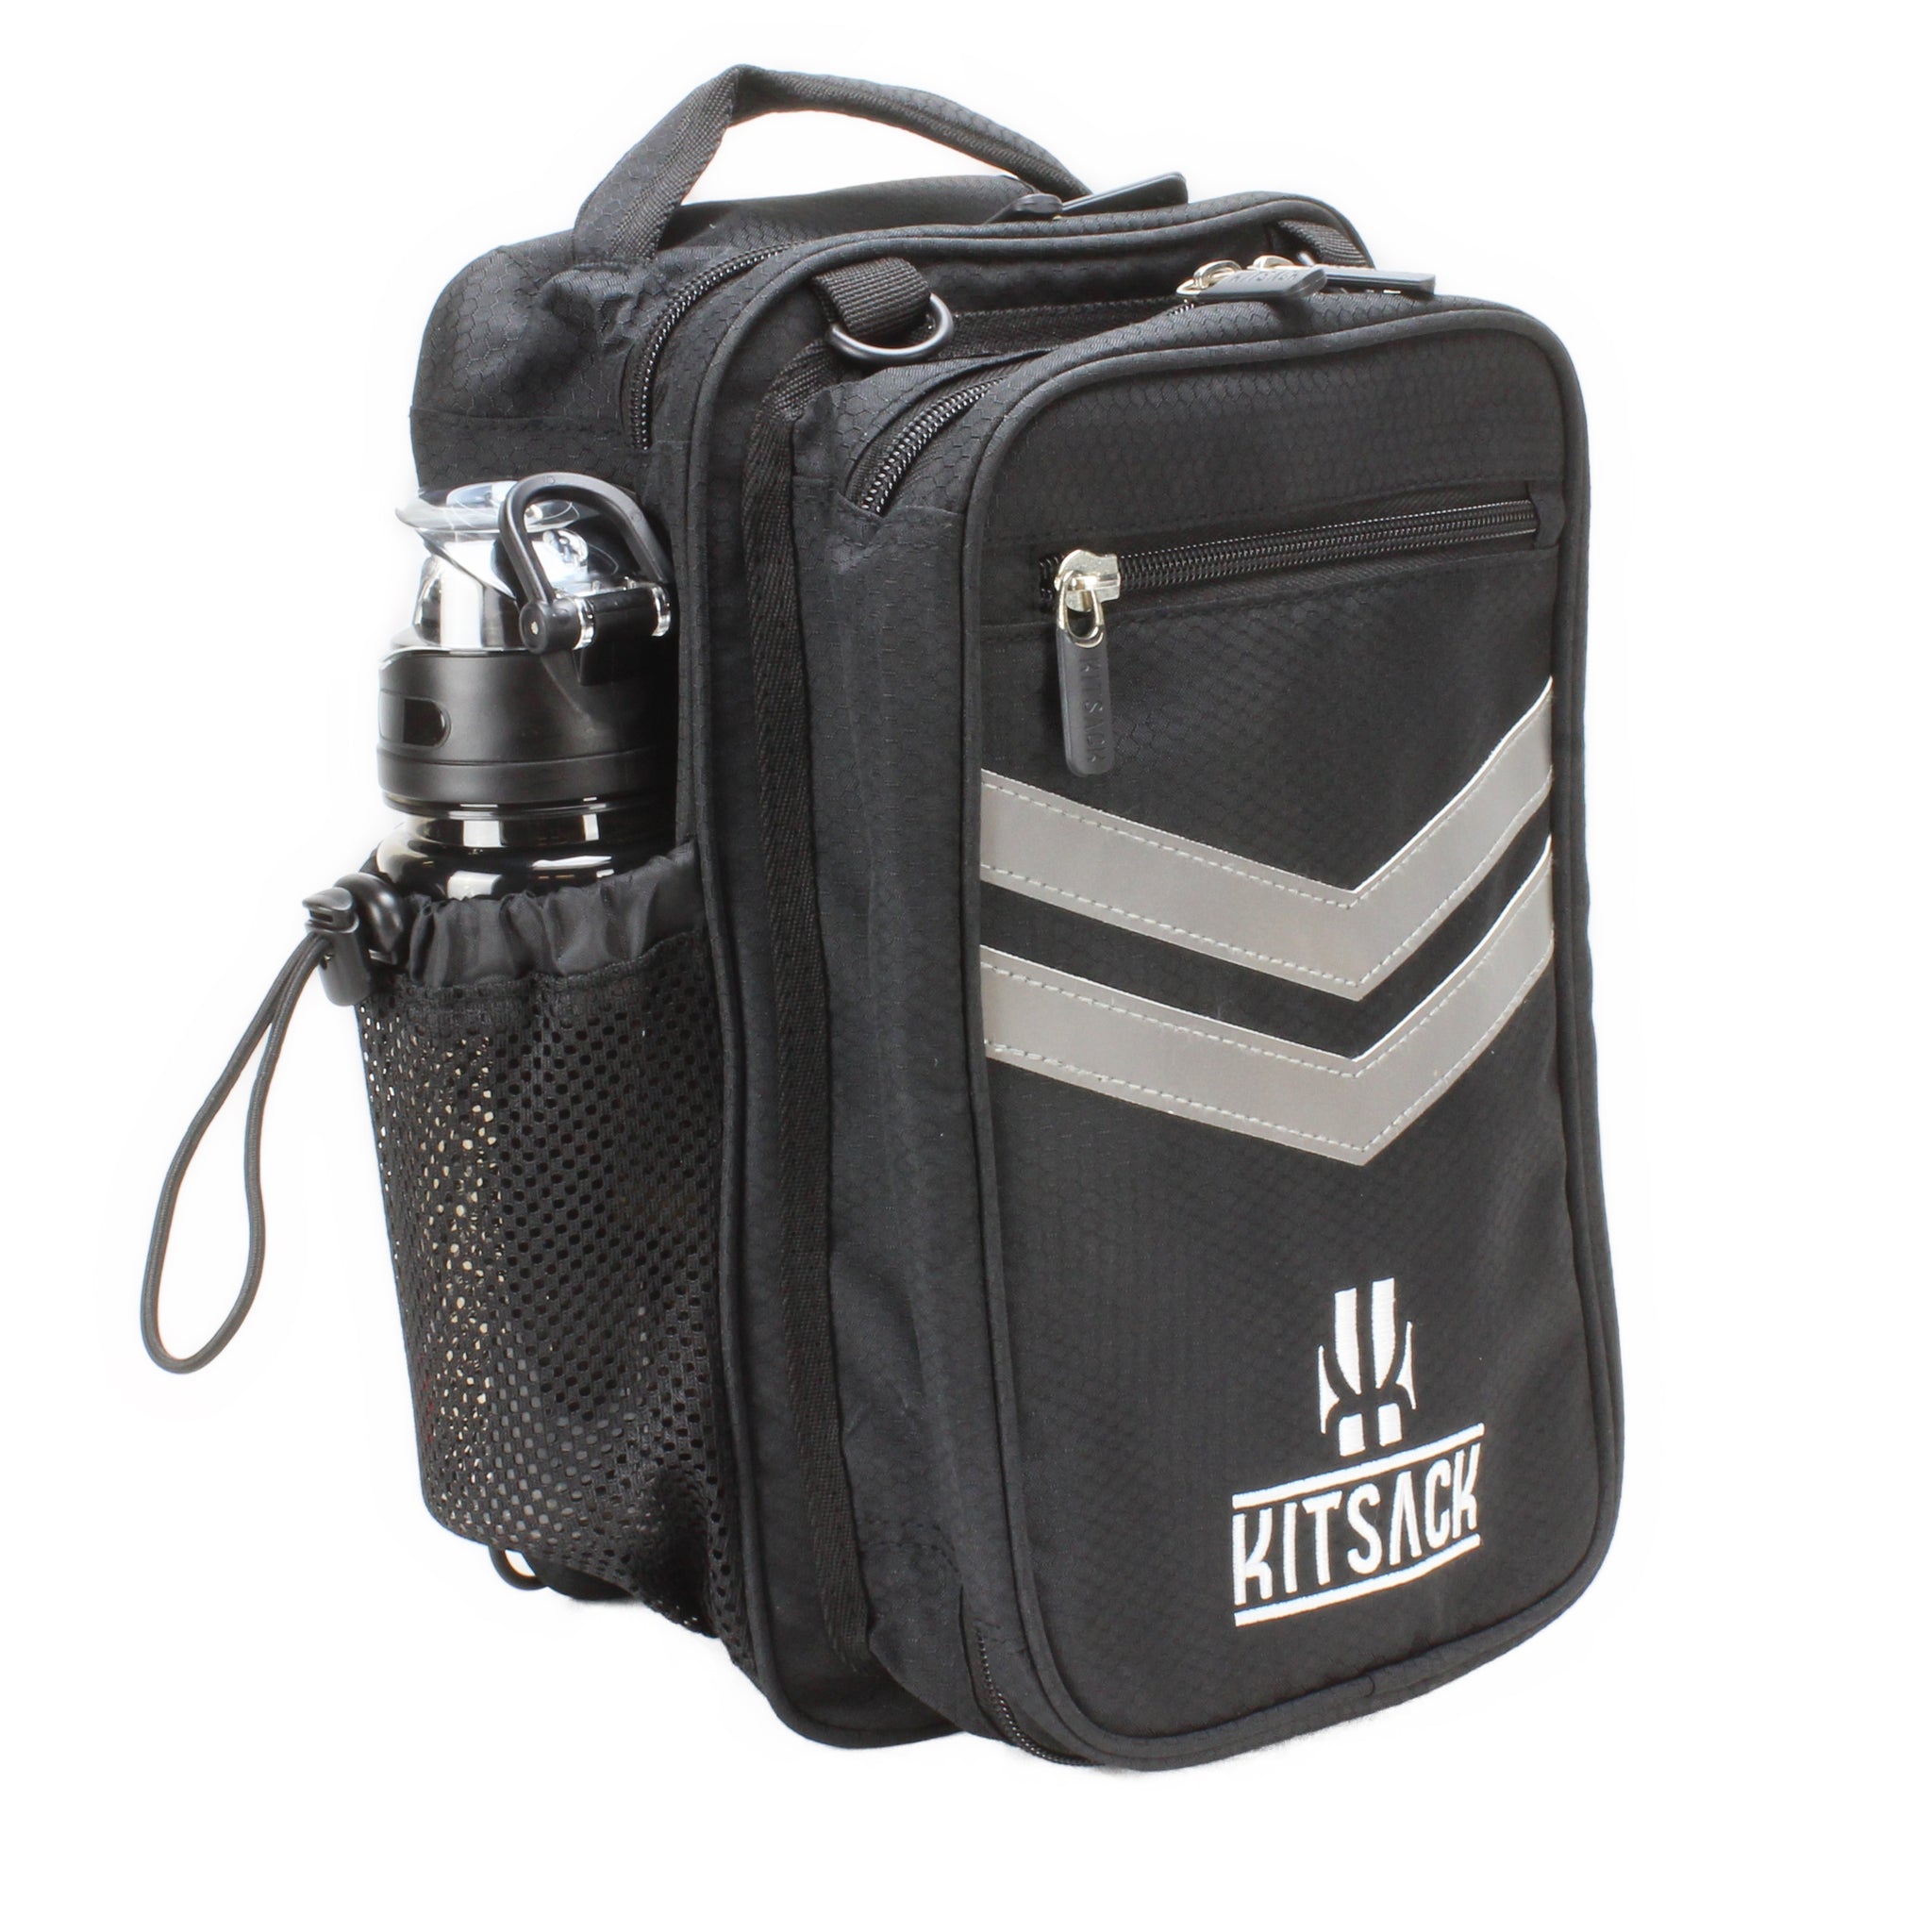 KITSACK Football and Rugby training bag, carry your boots, gloves, shin pads, ball and all your training gear in one bag